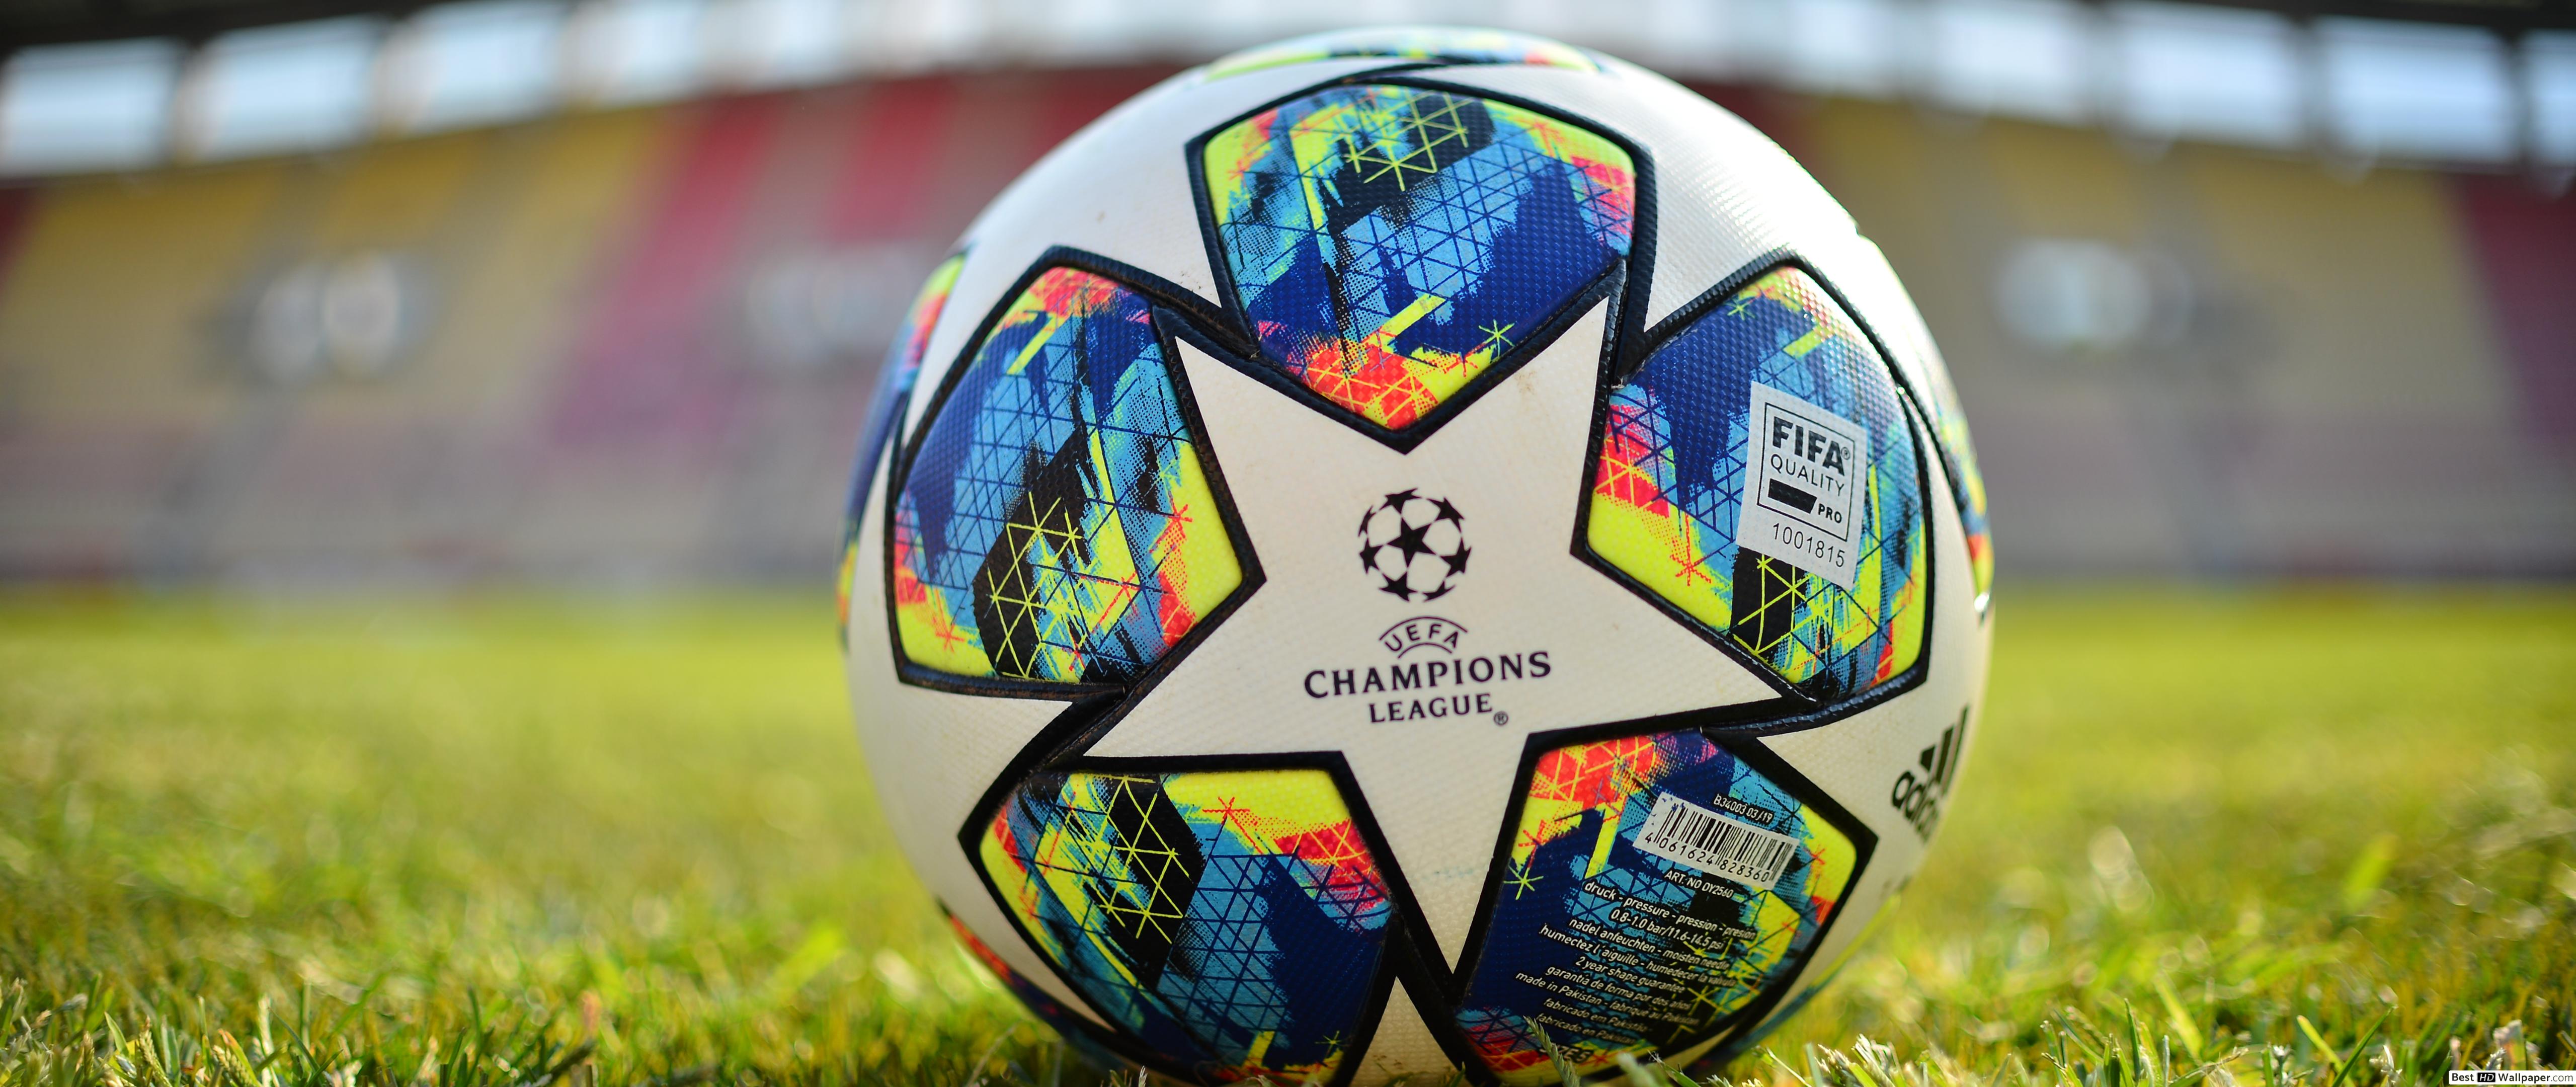 Free download Uefa Champions League 2020 Wallpapers [5120x2160] for